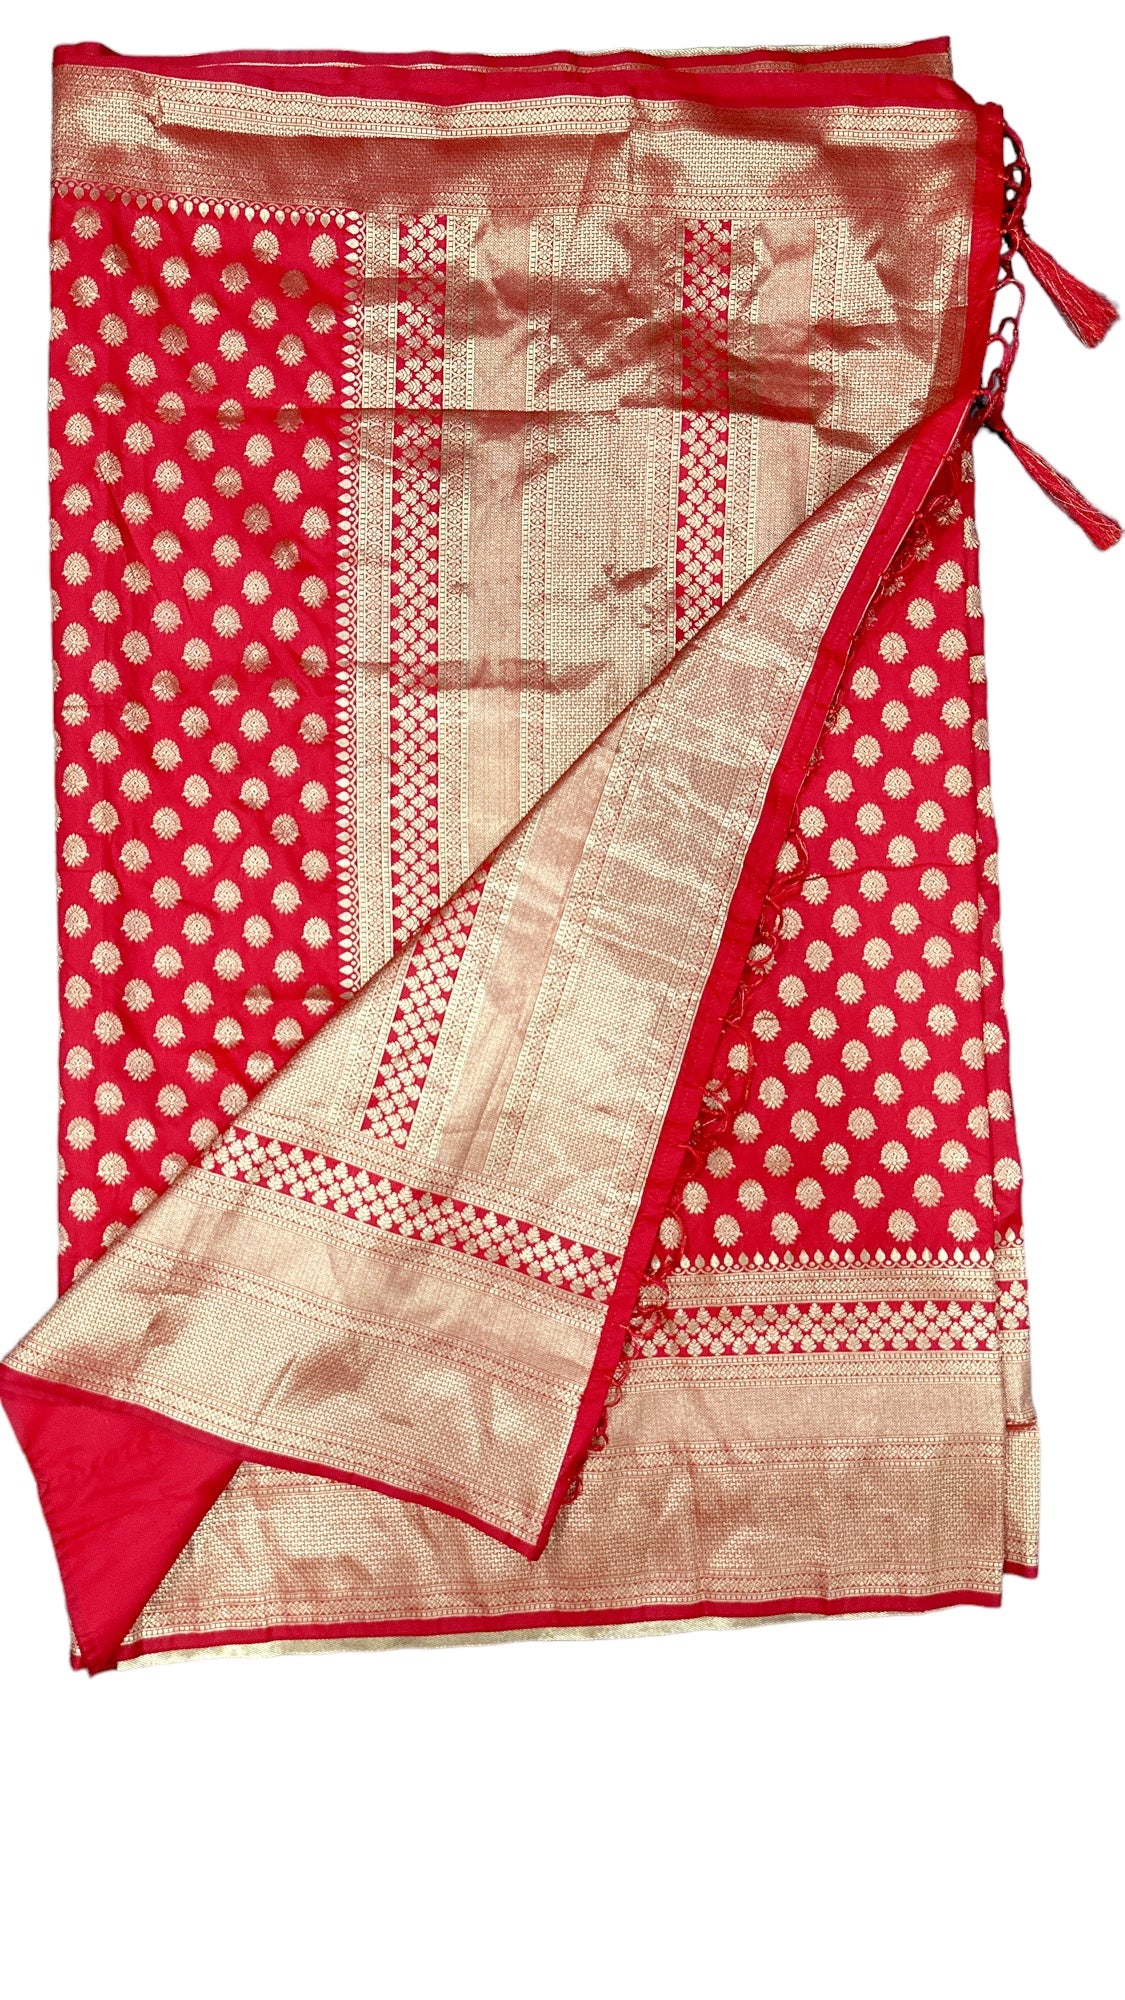 Fiery Red silk saree with elaborate zari work and comes with stitched Designer Blouse